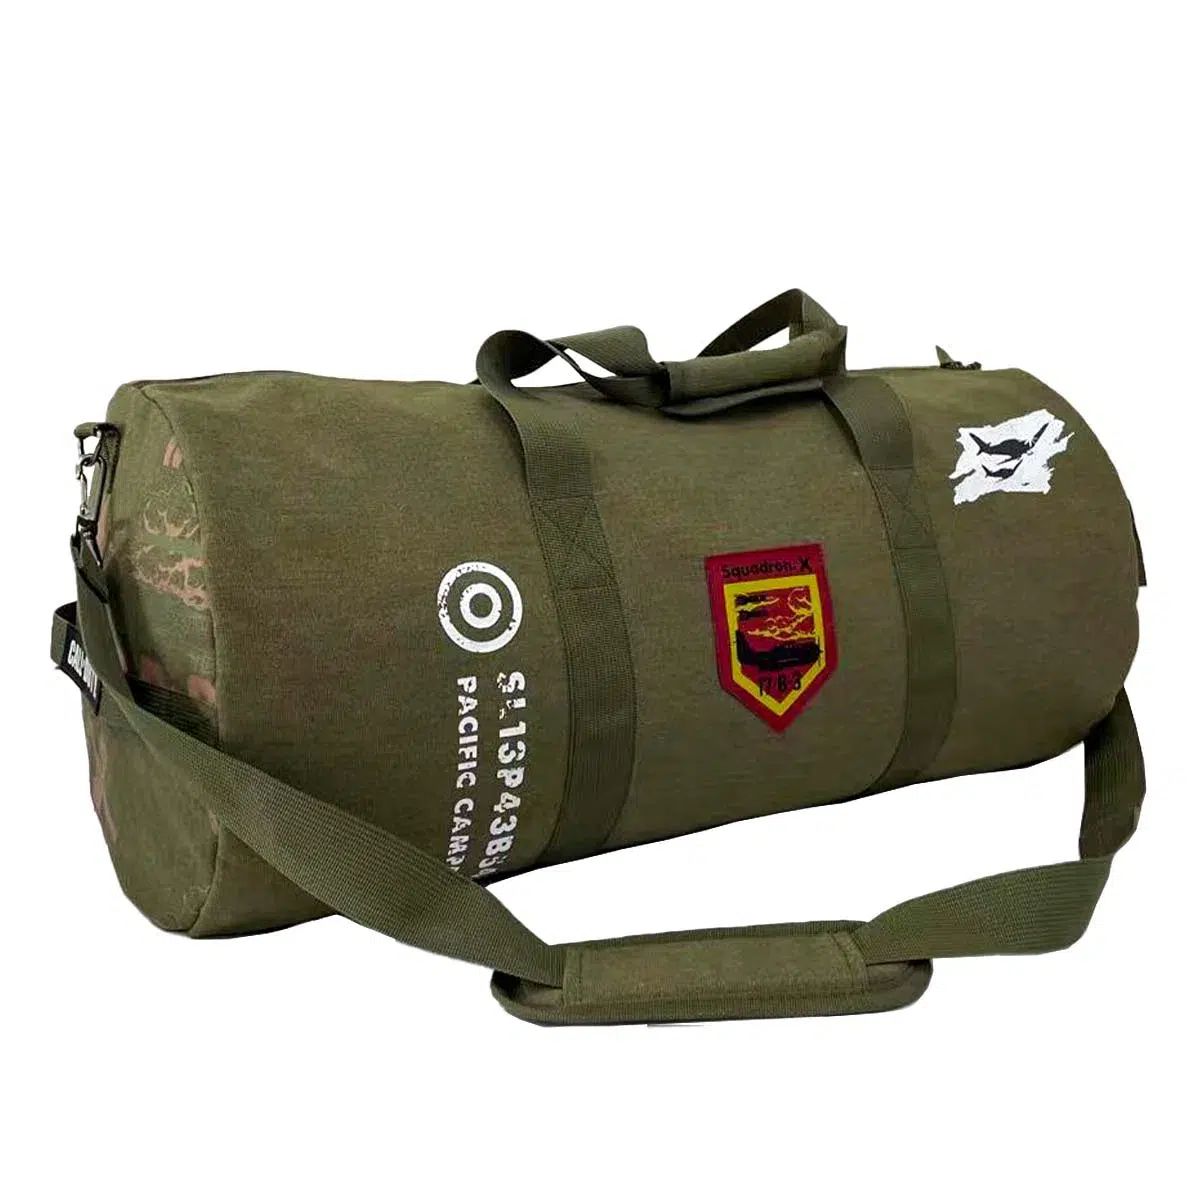 Call of Duty: Duffle Bag "Patches" Cover